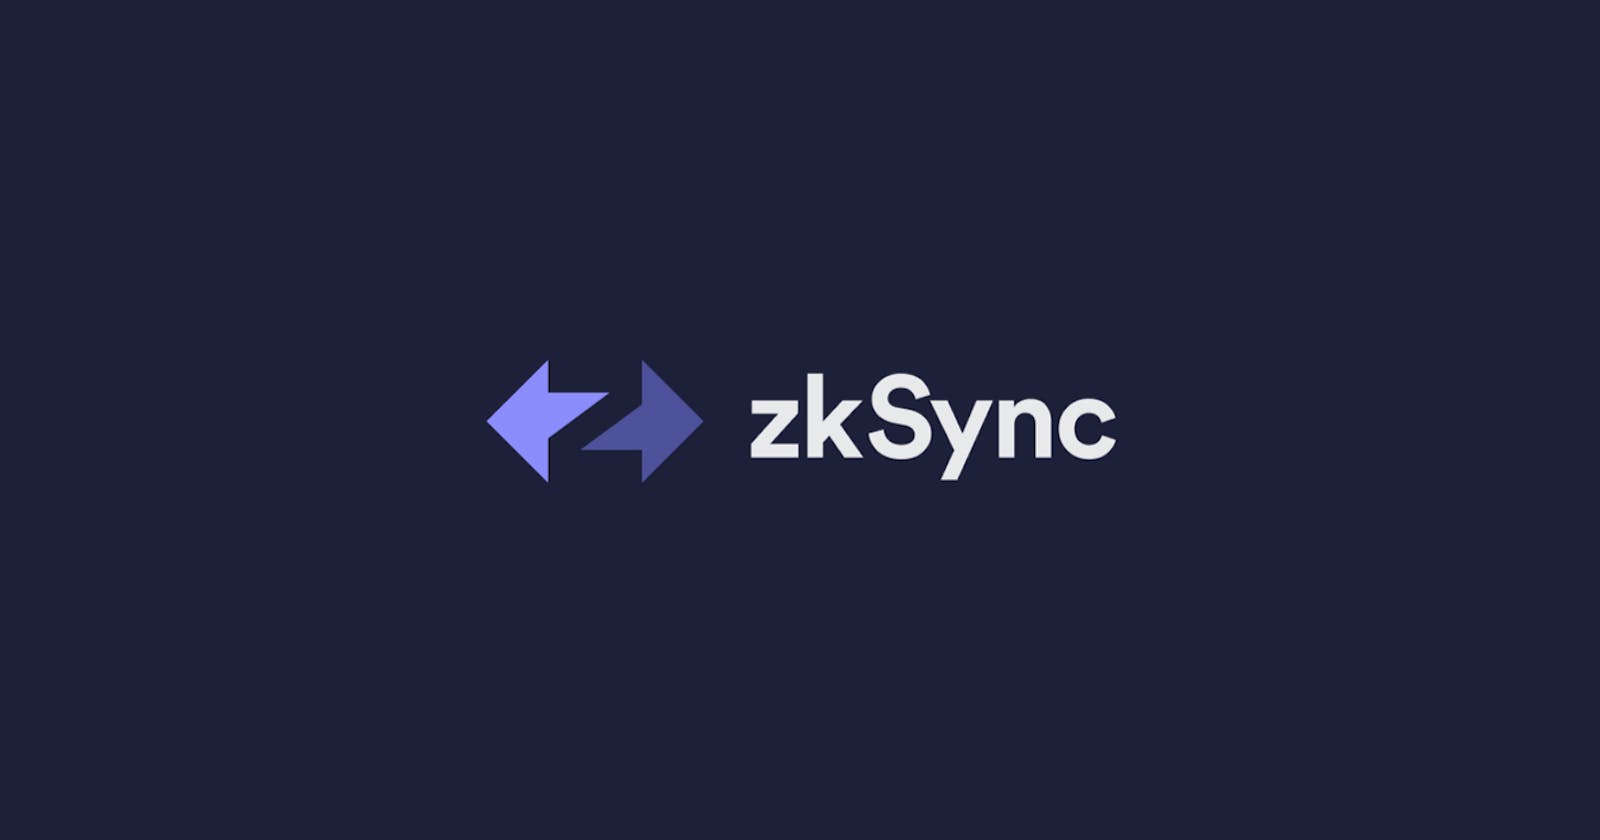 What is a zkSync chain?